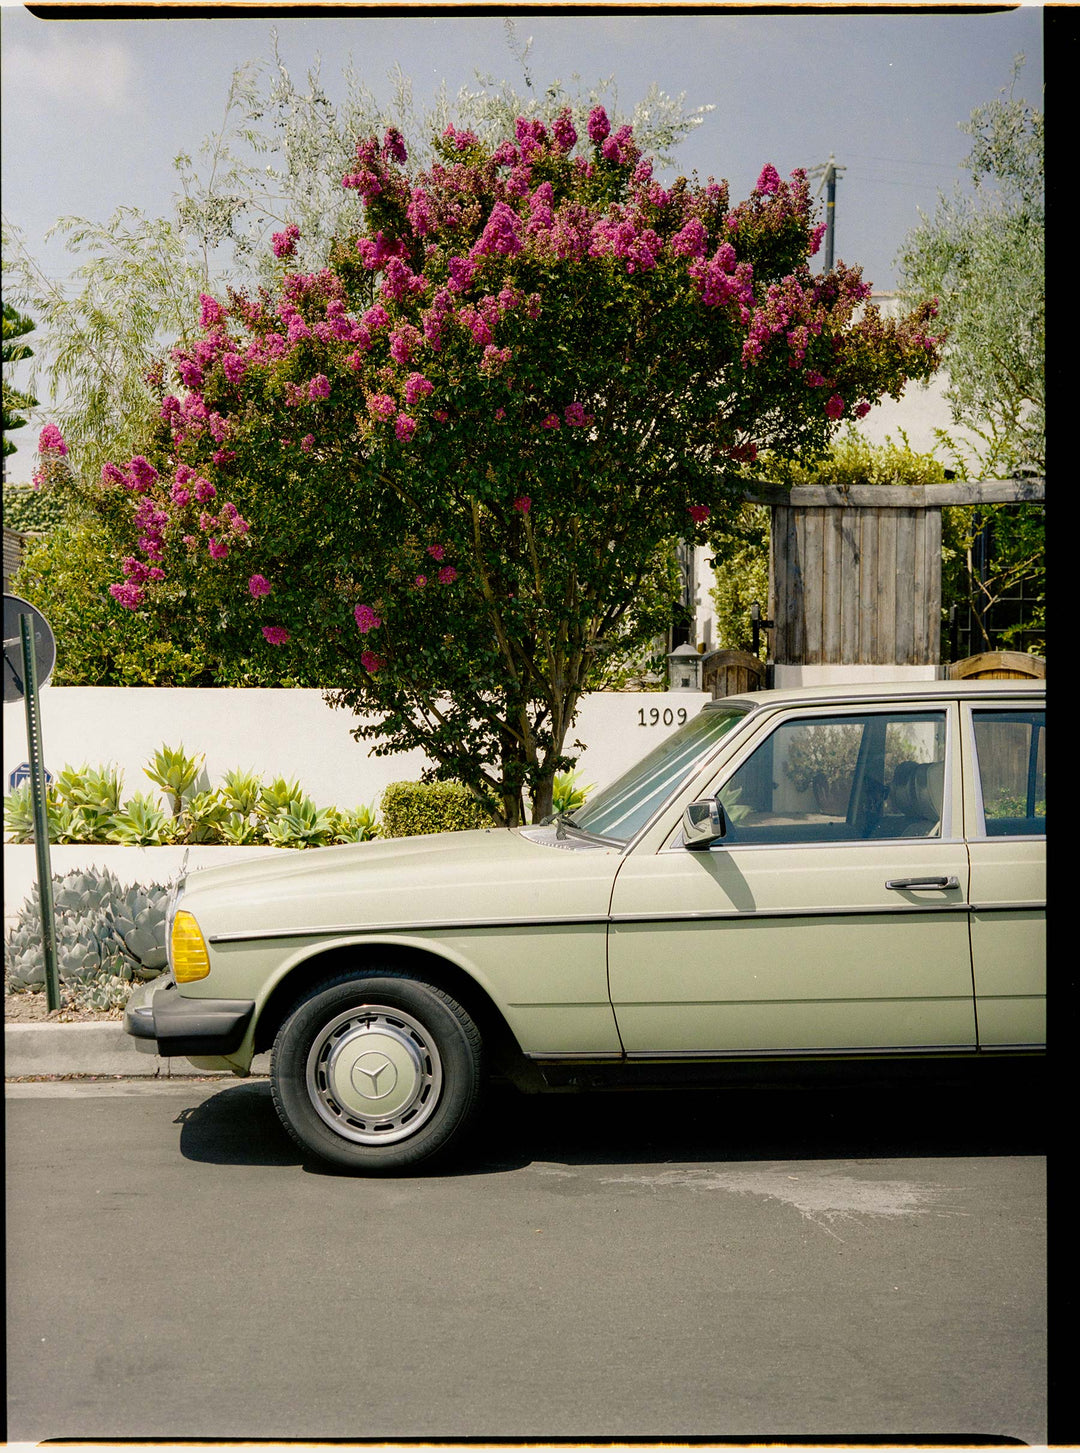 a car parked on the side of a road next to a tree with purple flowers